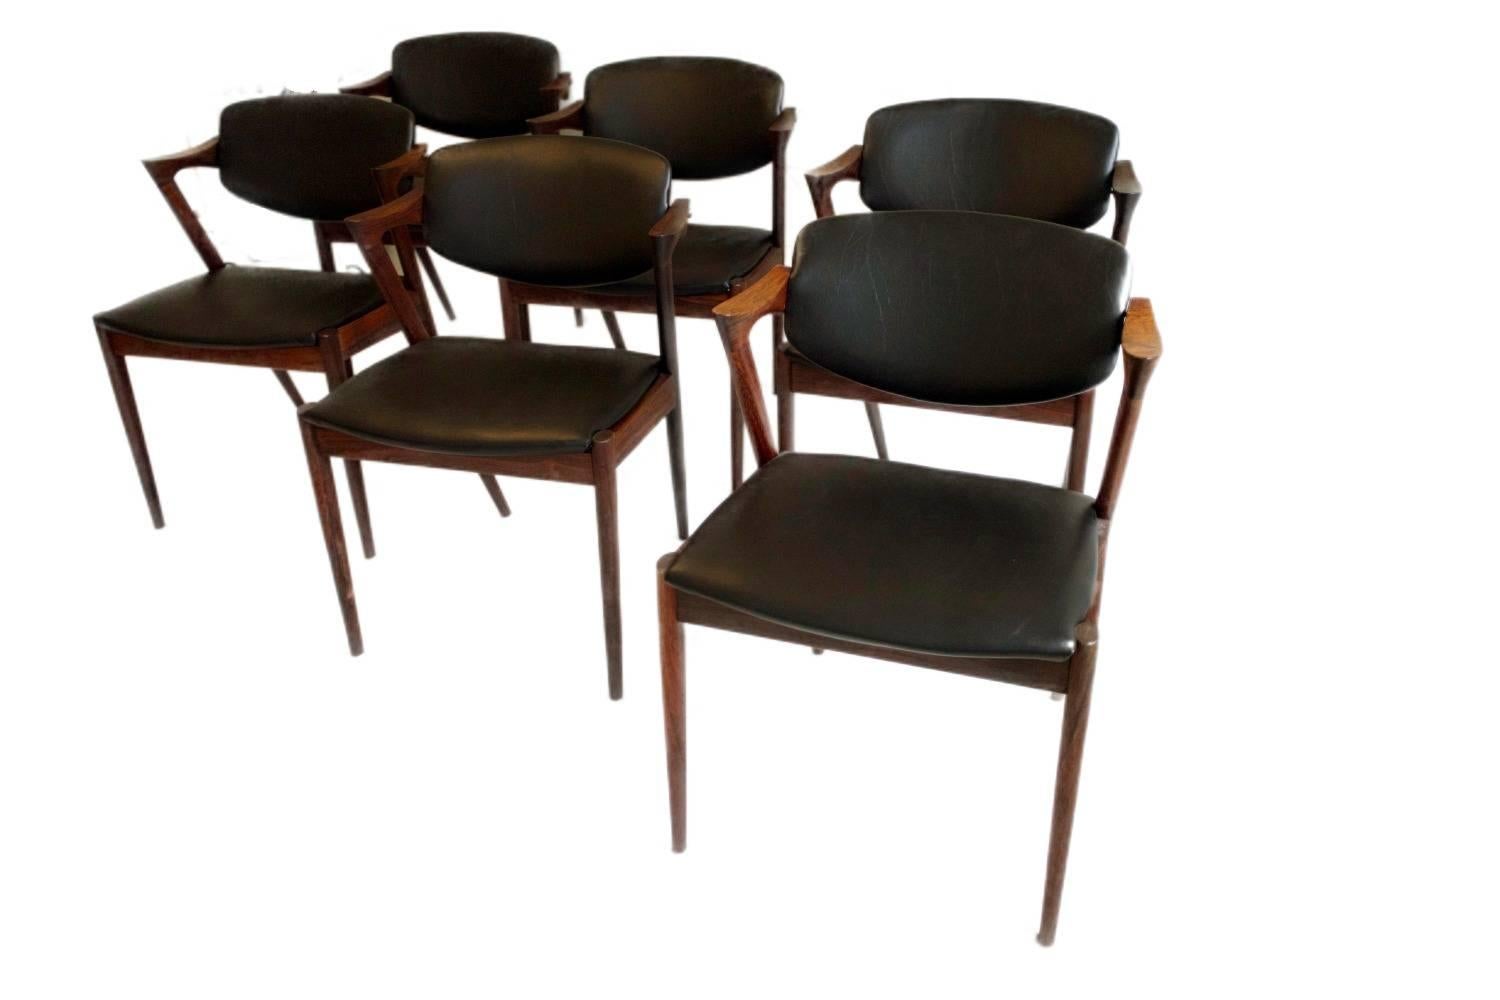 A set of six Kai Kristiansen, model 42, dining room chairs in rosewood. They come with black leather.

The chairs were designed in 1956-1957 and manufactured at Schou Andersen's furniture factory in Denmark.

We will ship worldwide. The buyer will